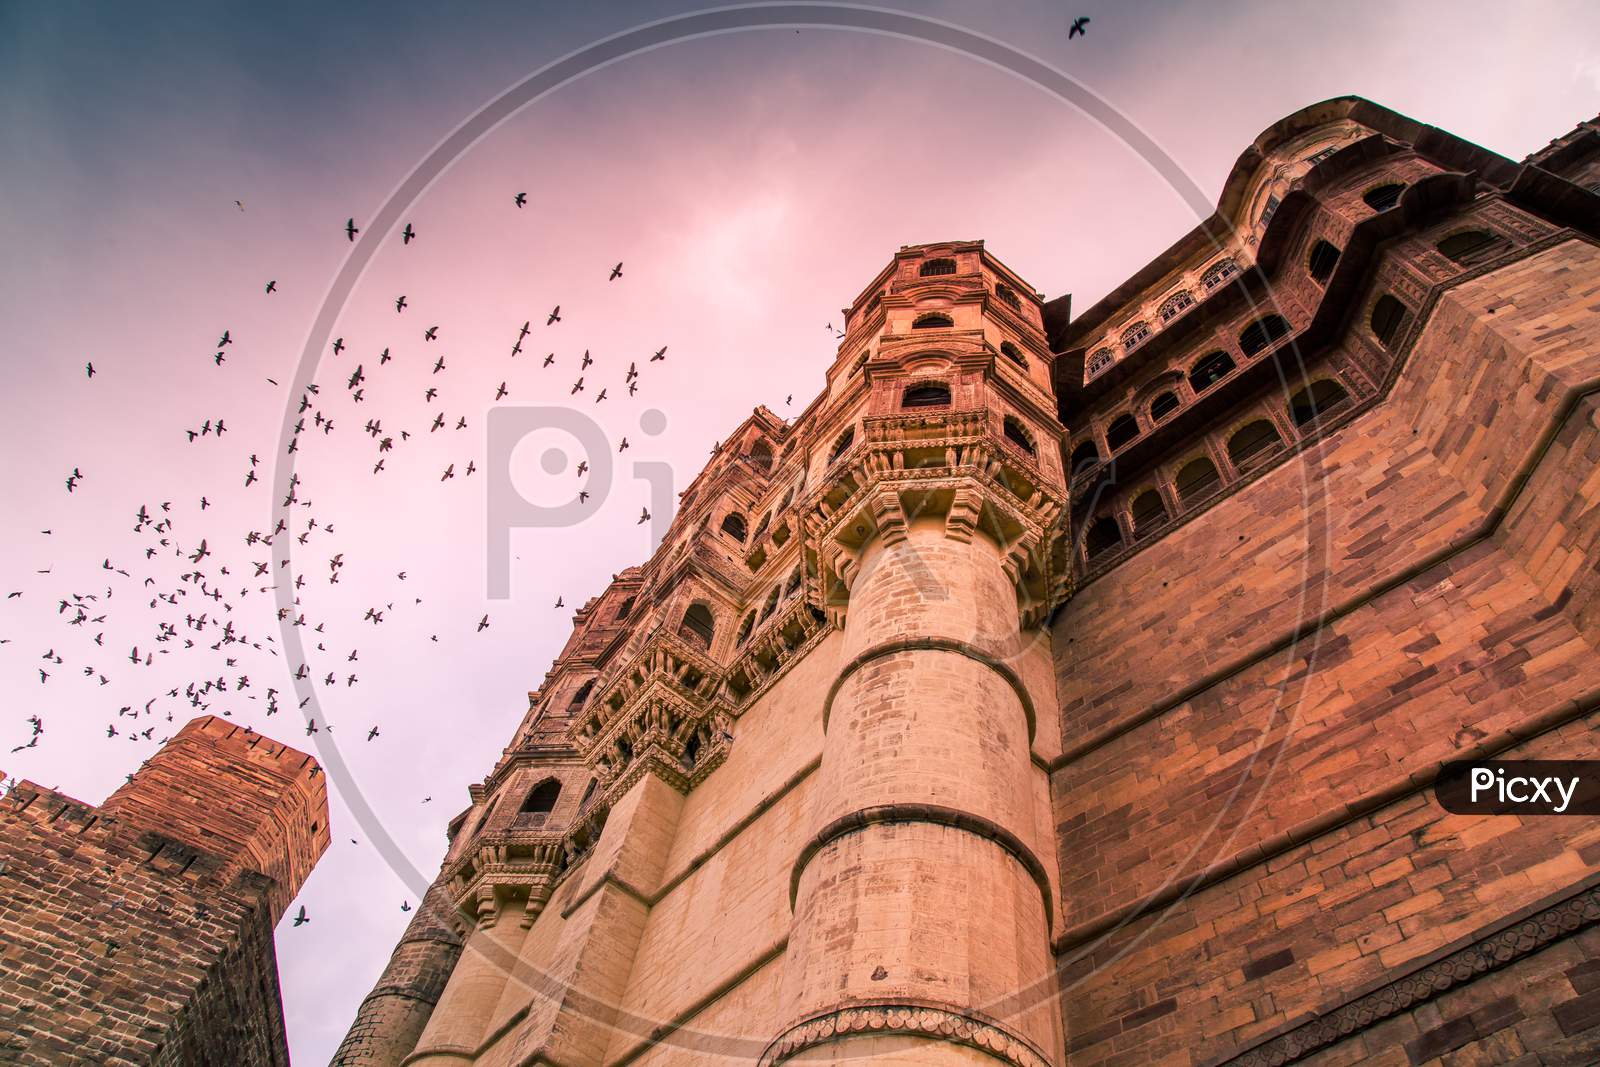 Mehrangarh Fort, one of The Largest Forts In India, Rajasthan, Jodhpur